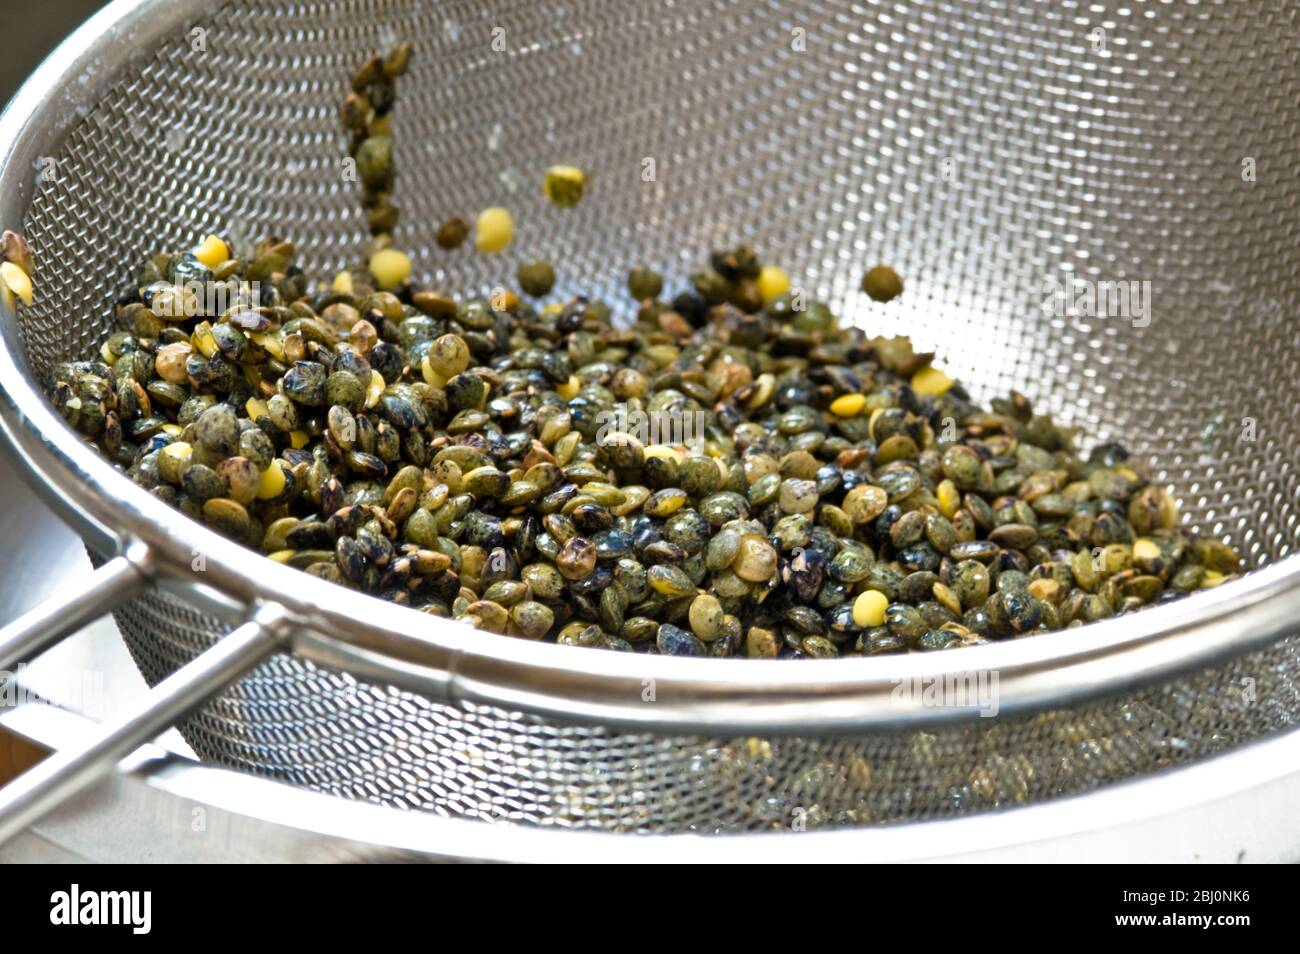 French Puy lentils being washed before cooking - Stock Photo